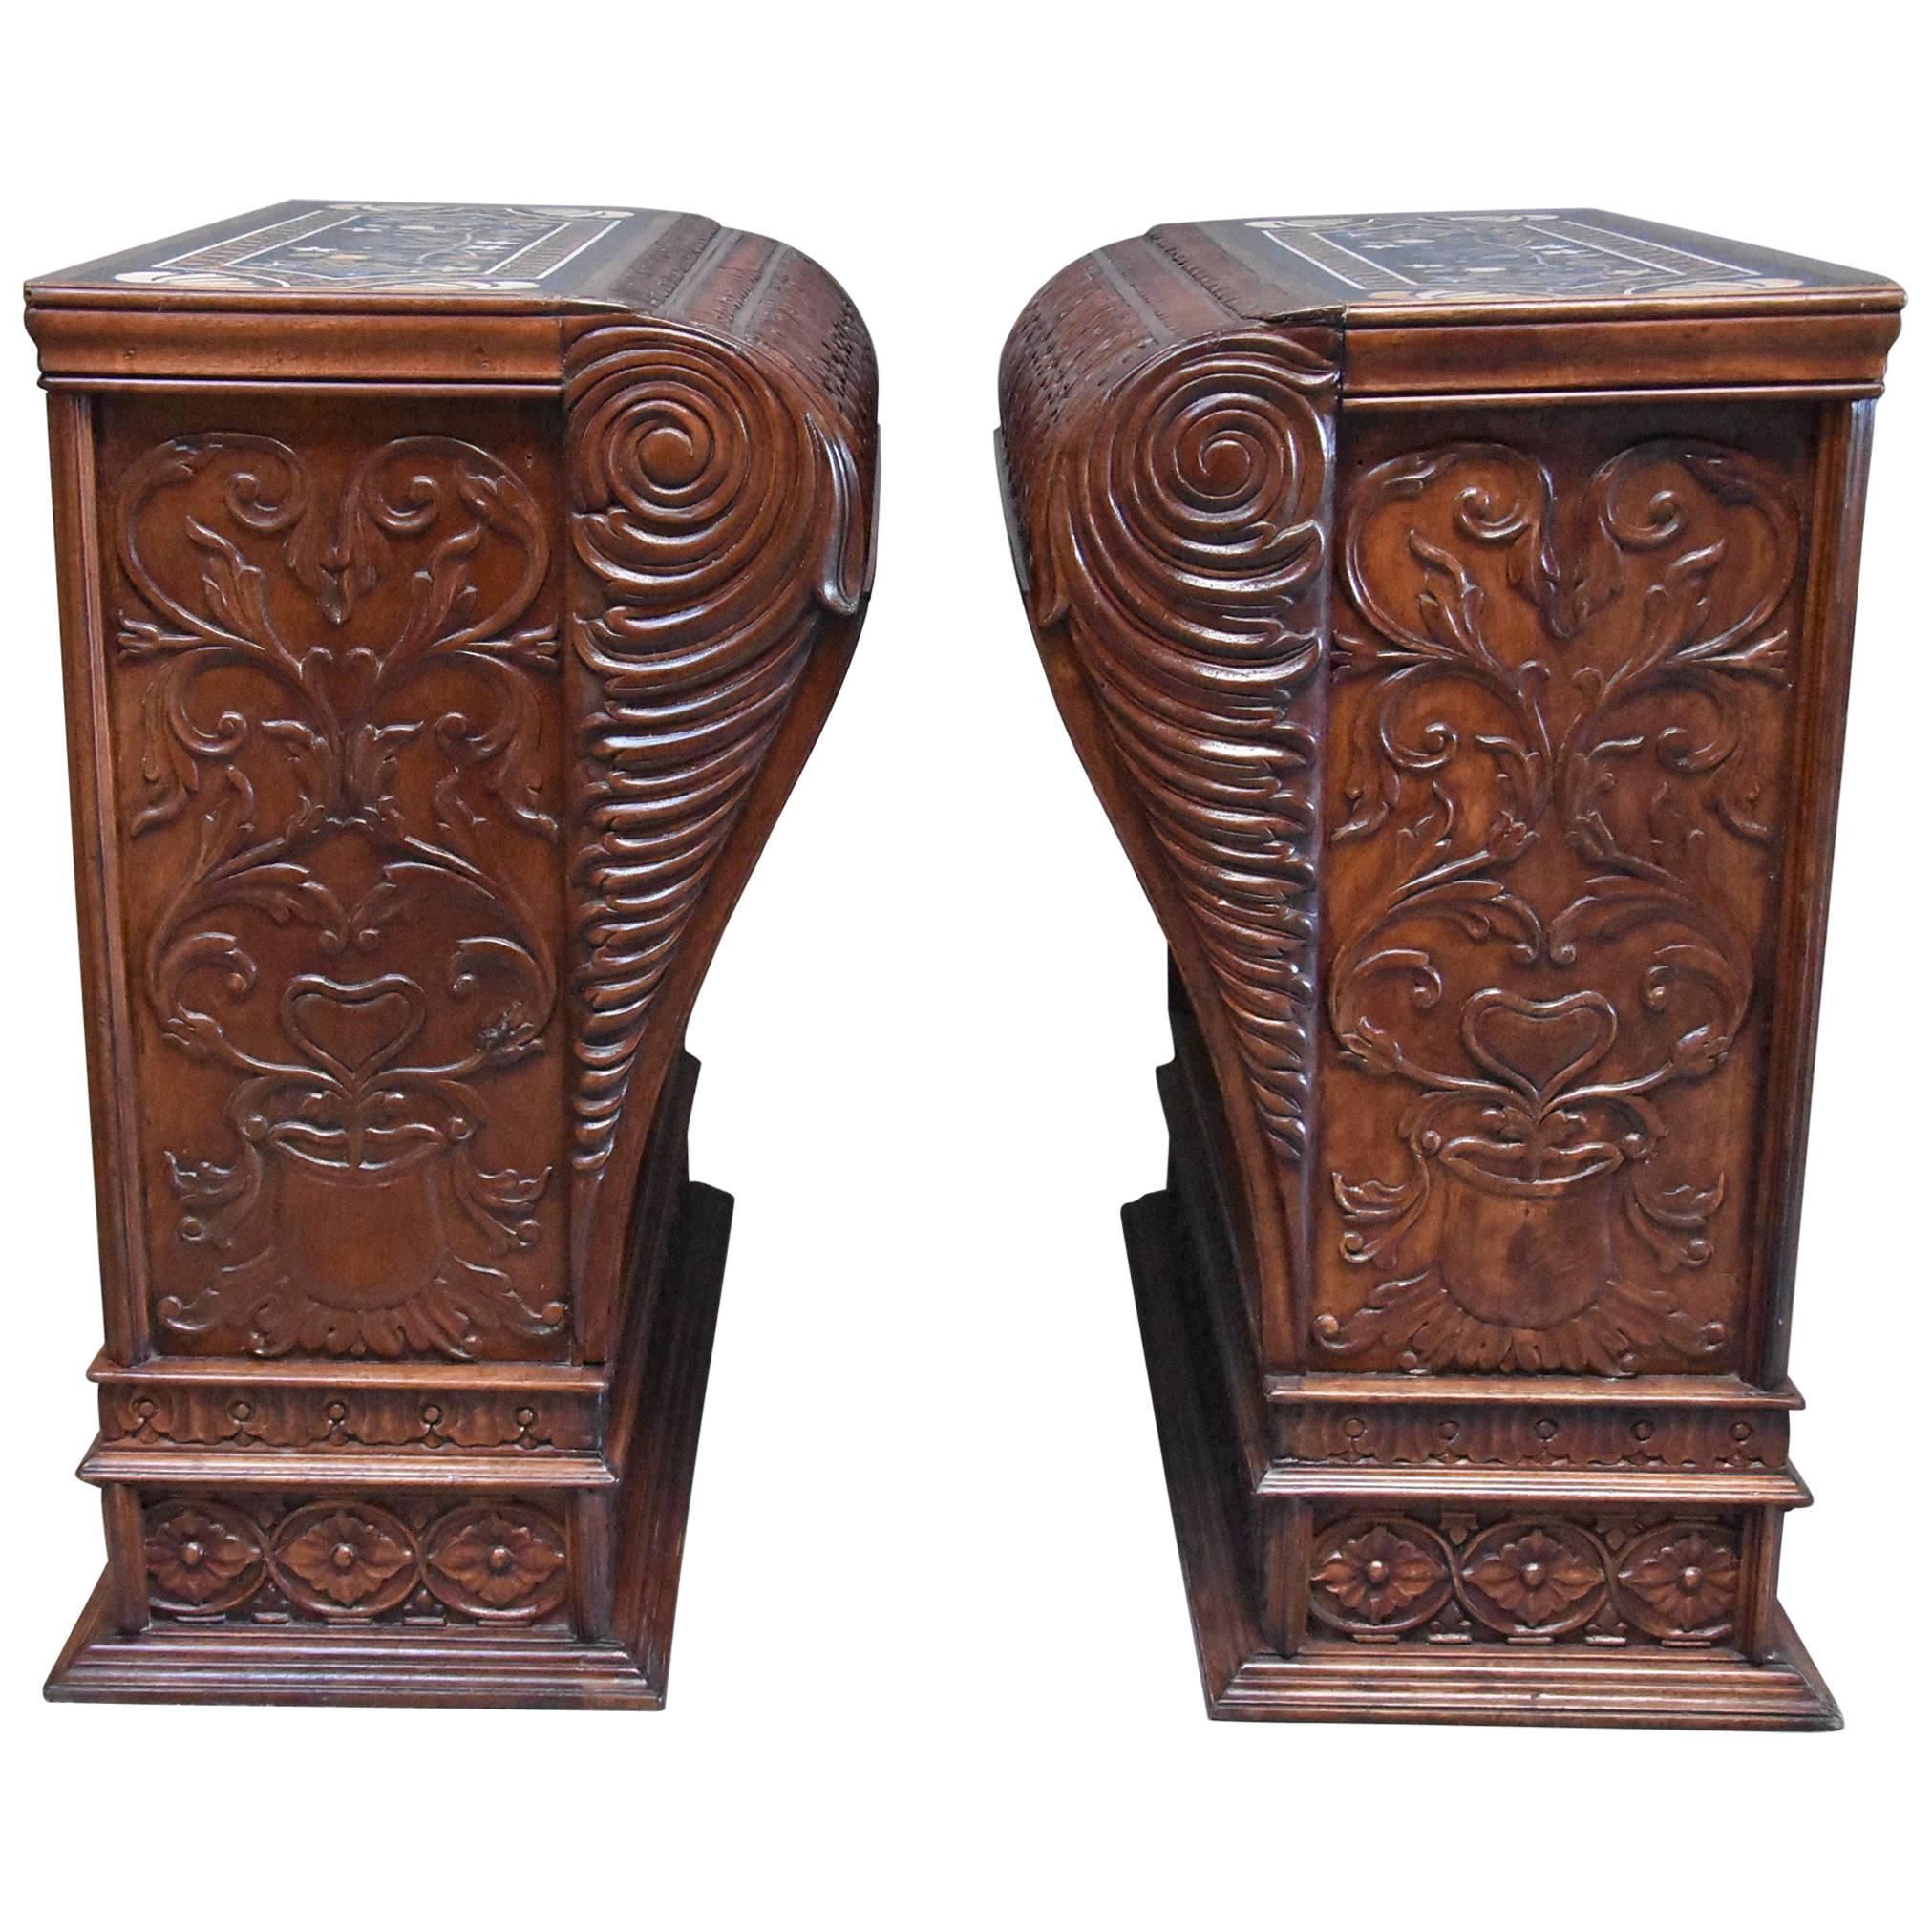 Large Pair of Late 19thc Walnut Pedestals with Pietre Dure marble tops